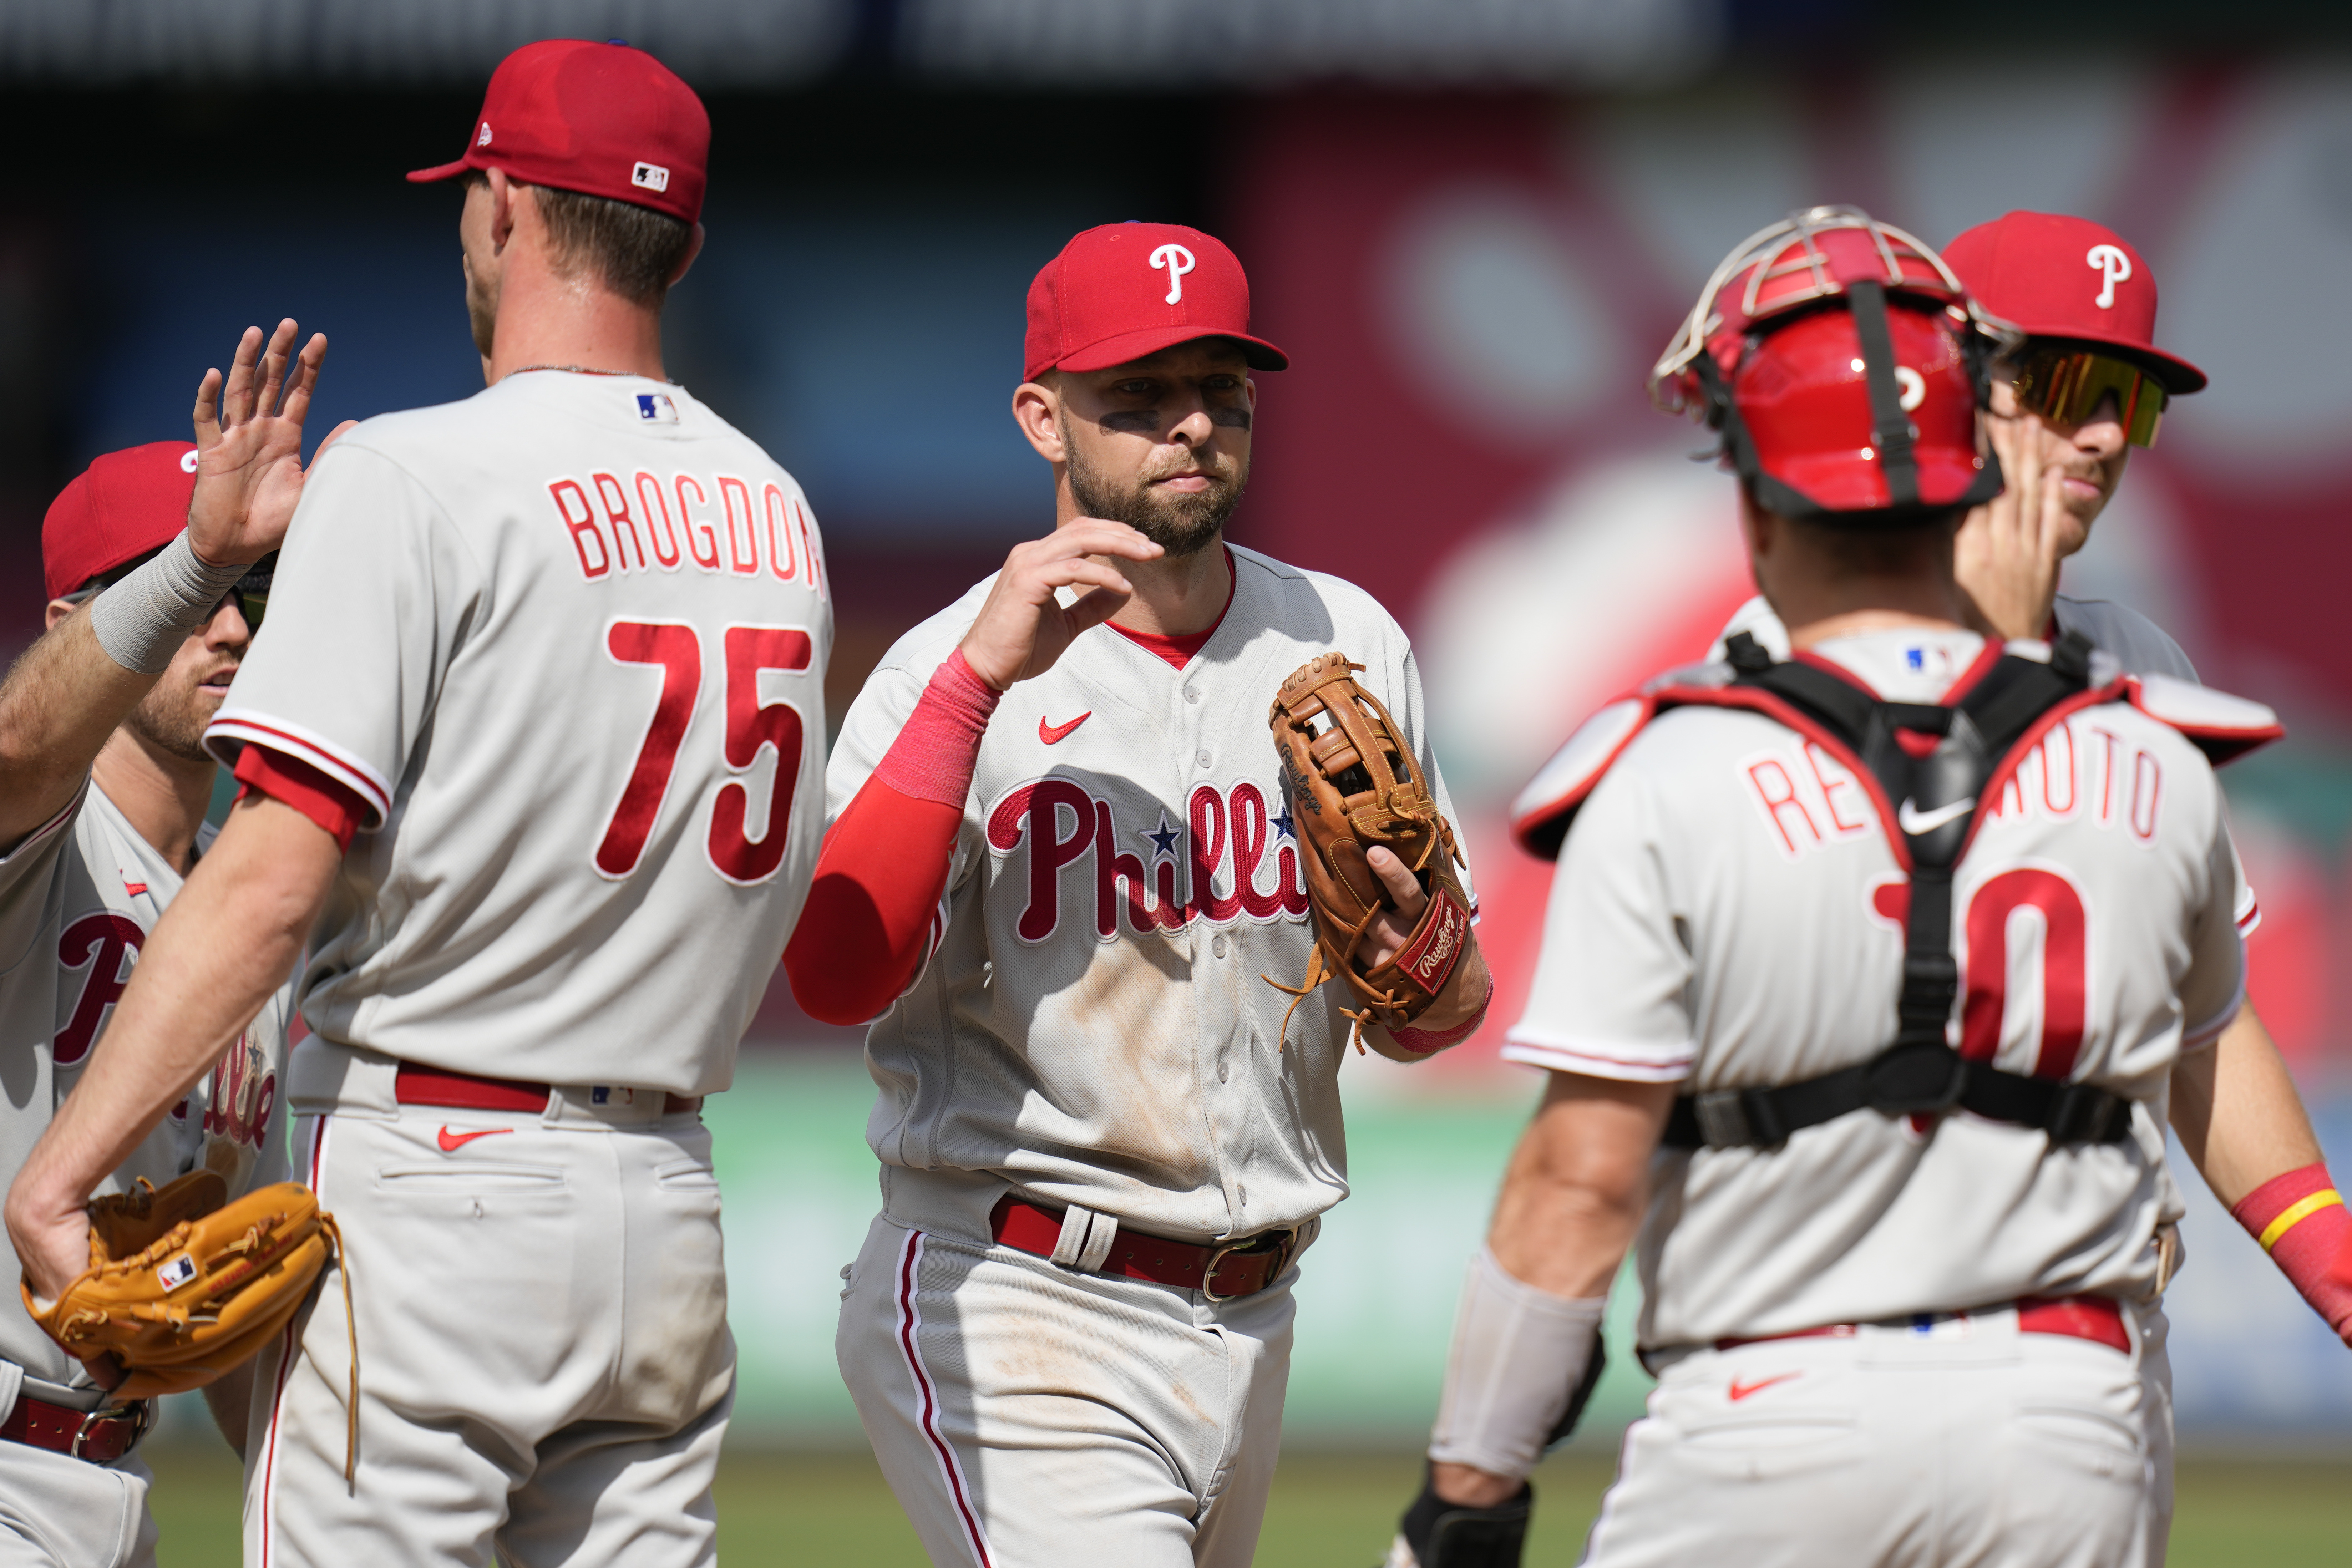 Washington Nationals Don't Lost By Improving Their Lineup